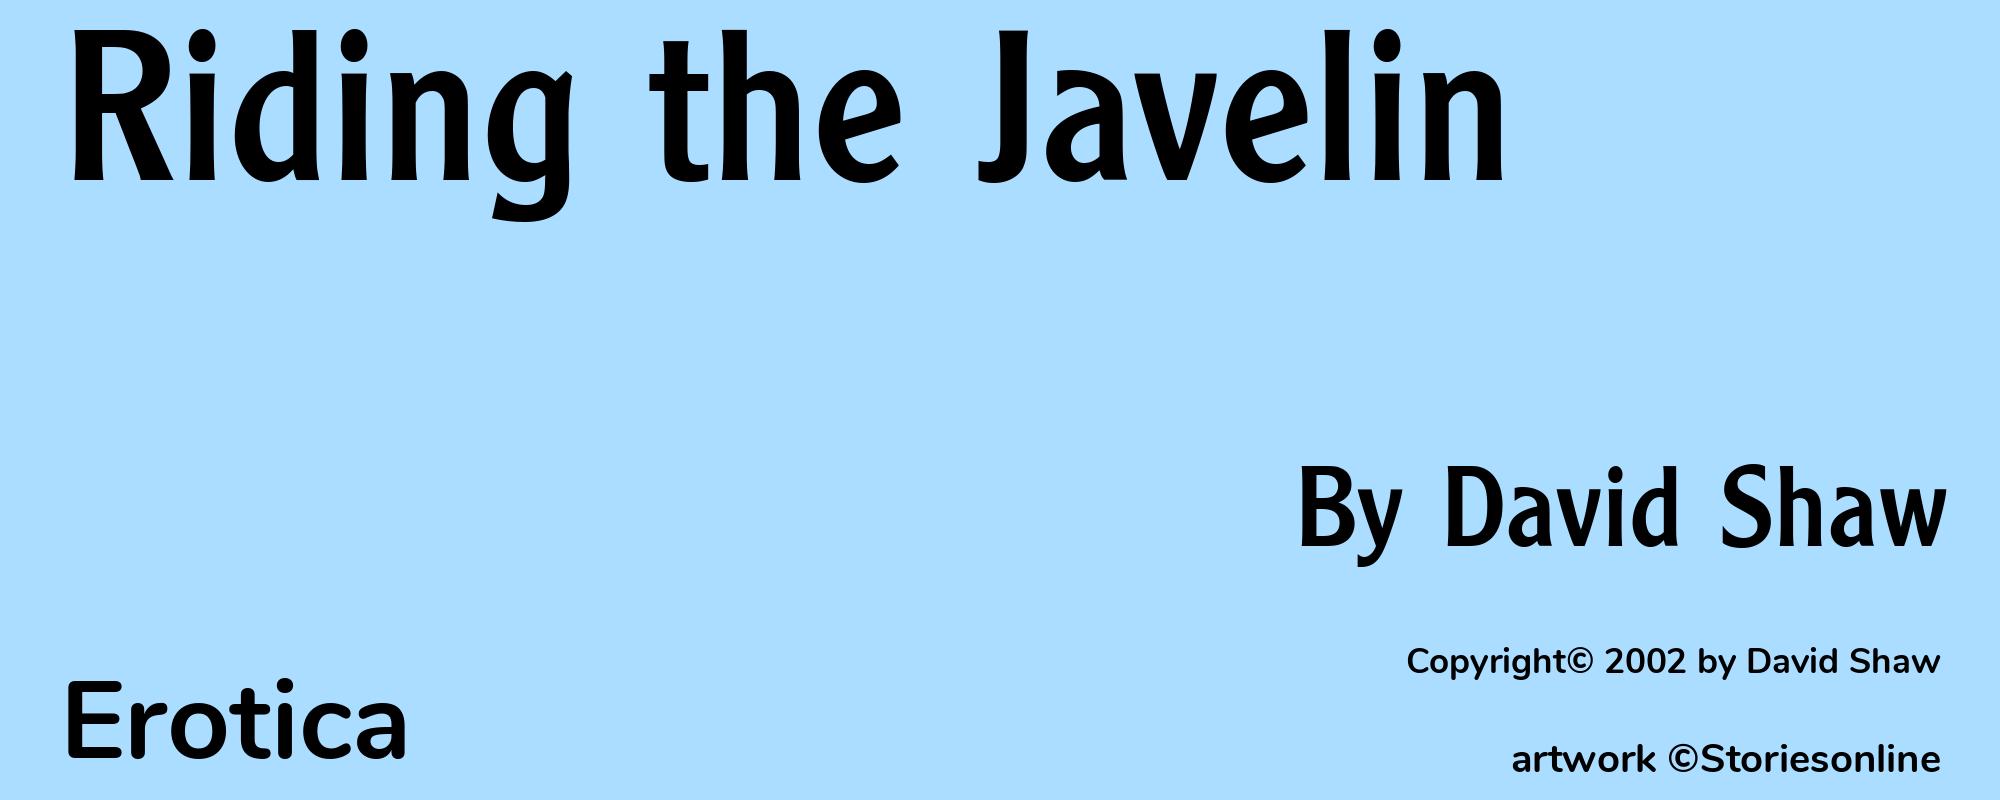 Riding the Javelin - Cover